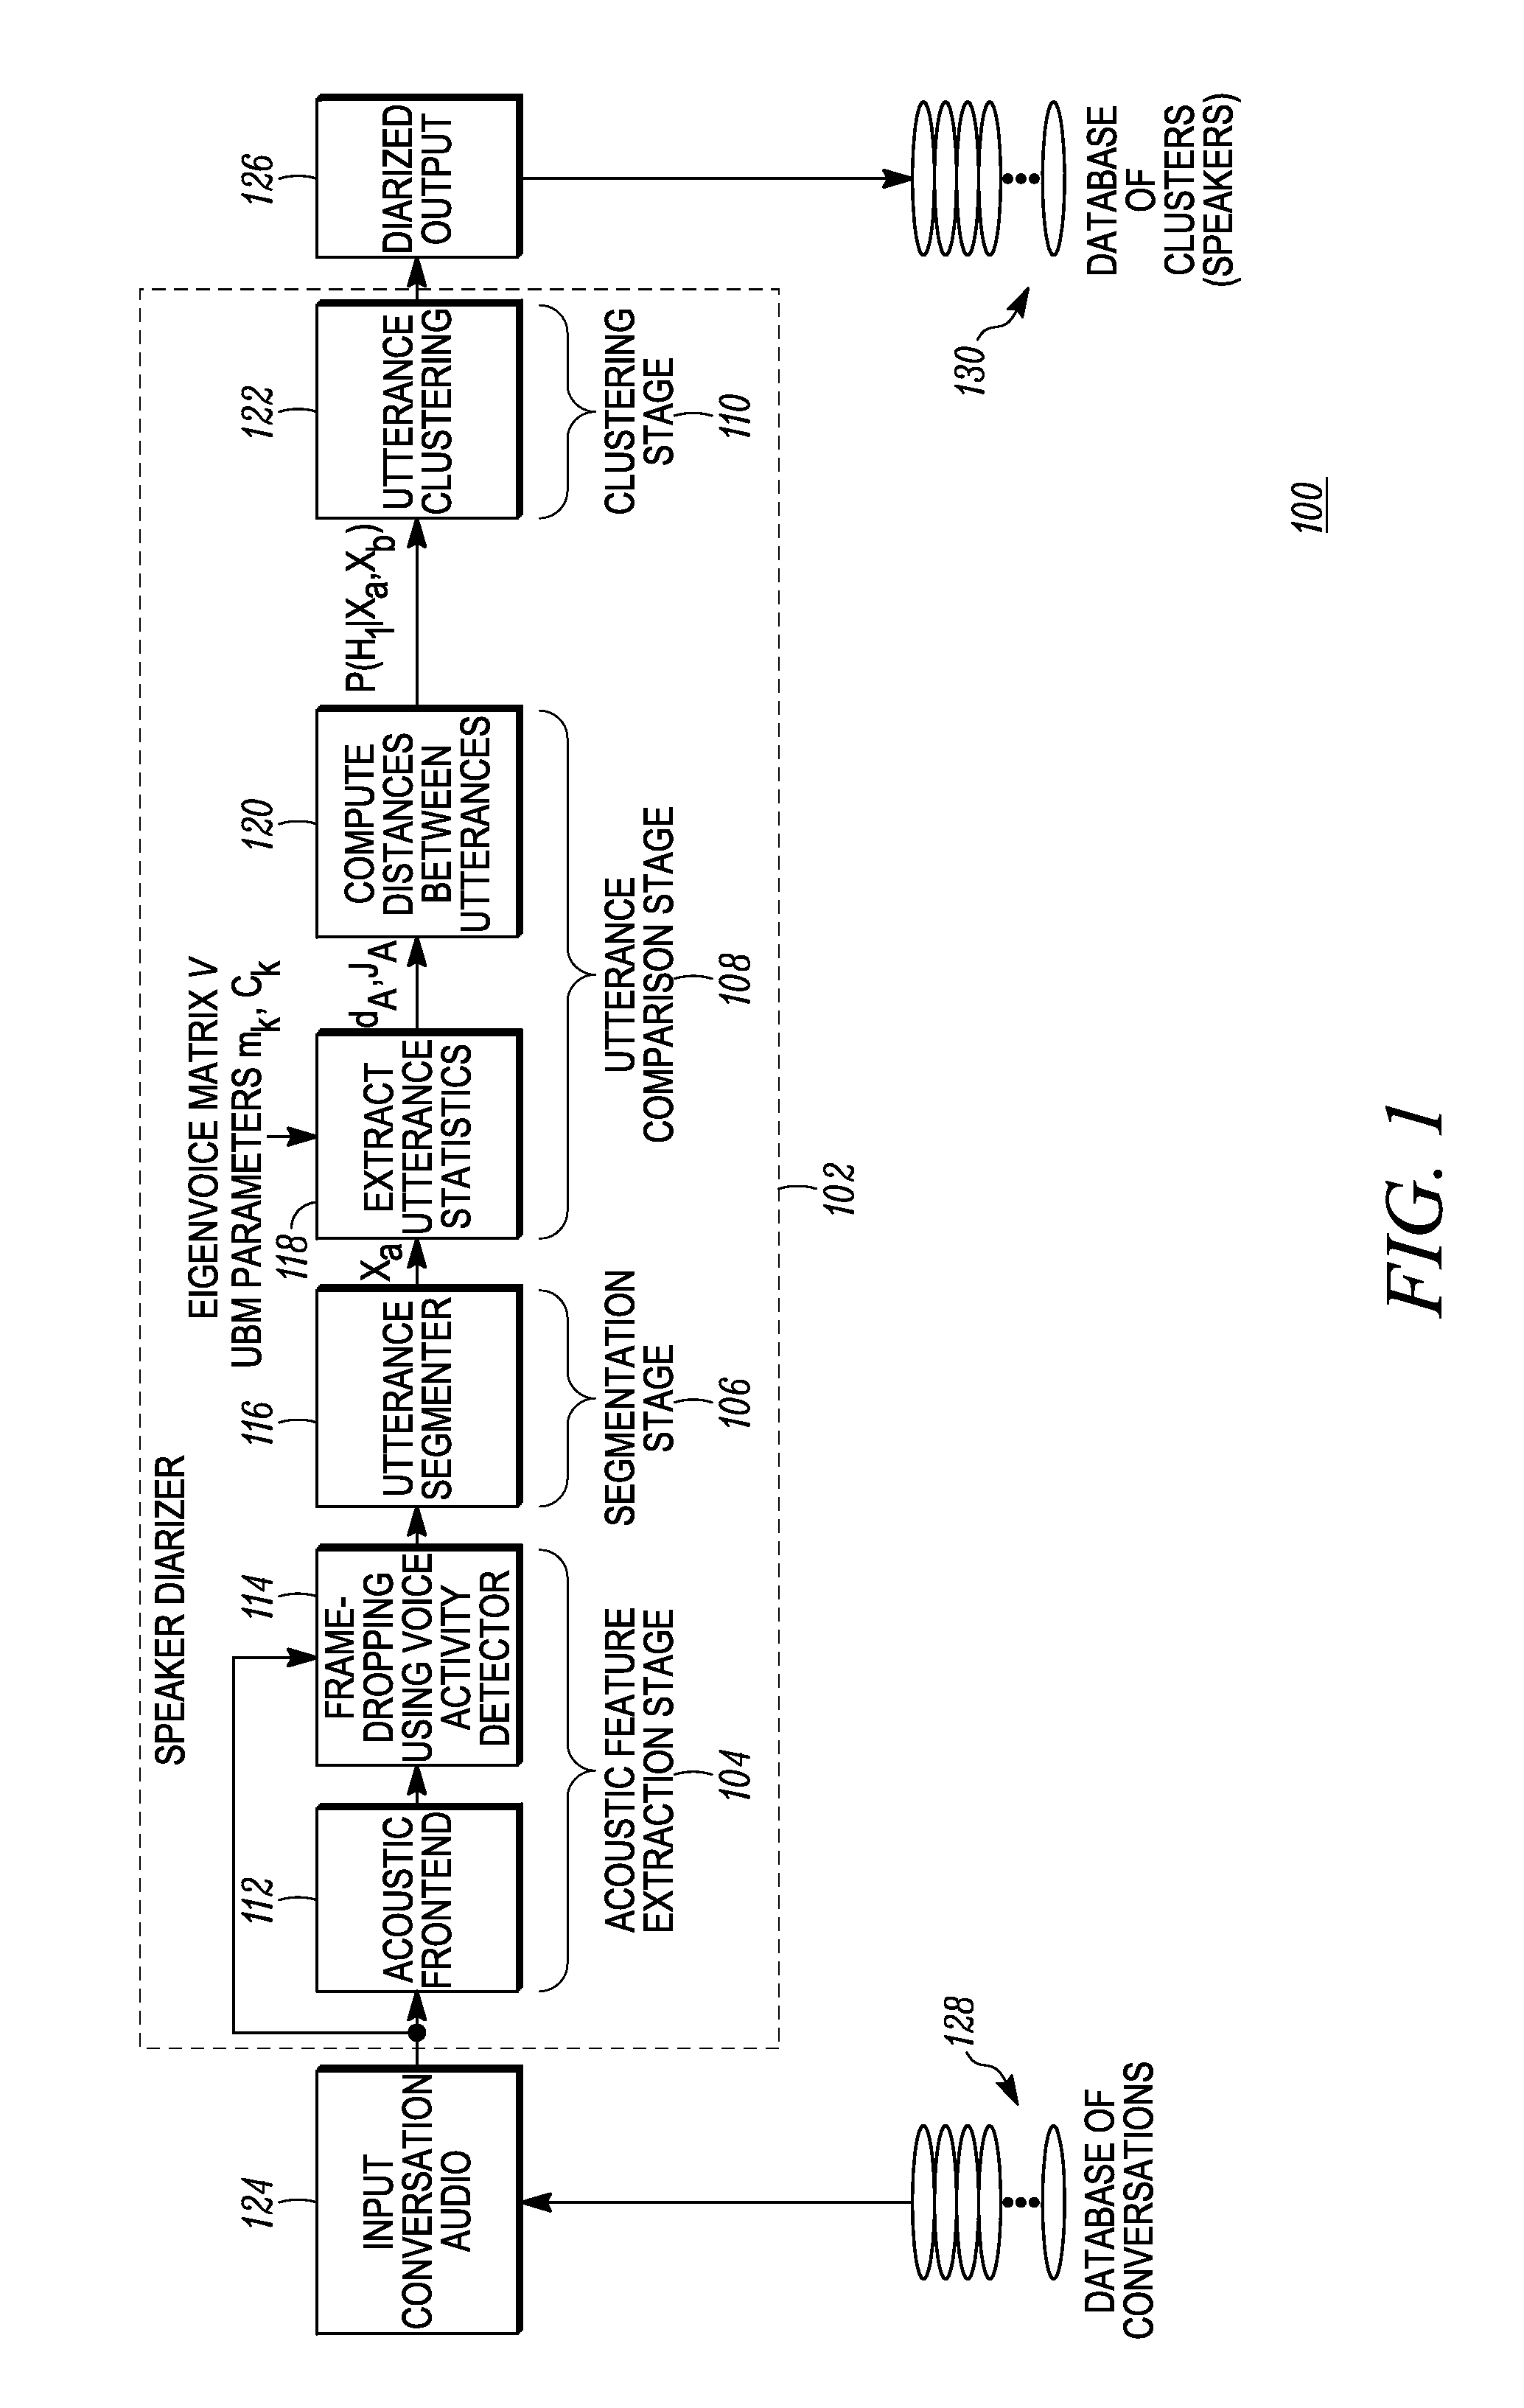 Methods for creating and searching a database of speakers